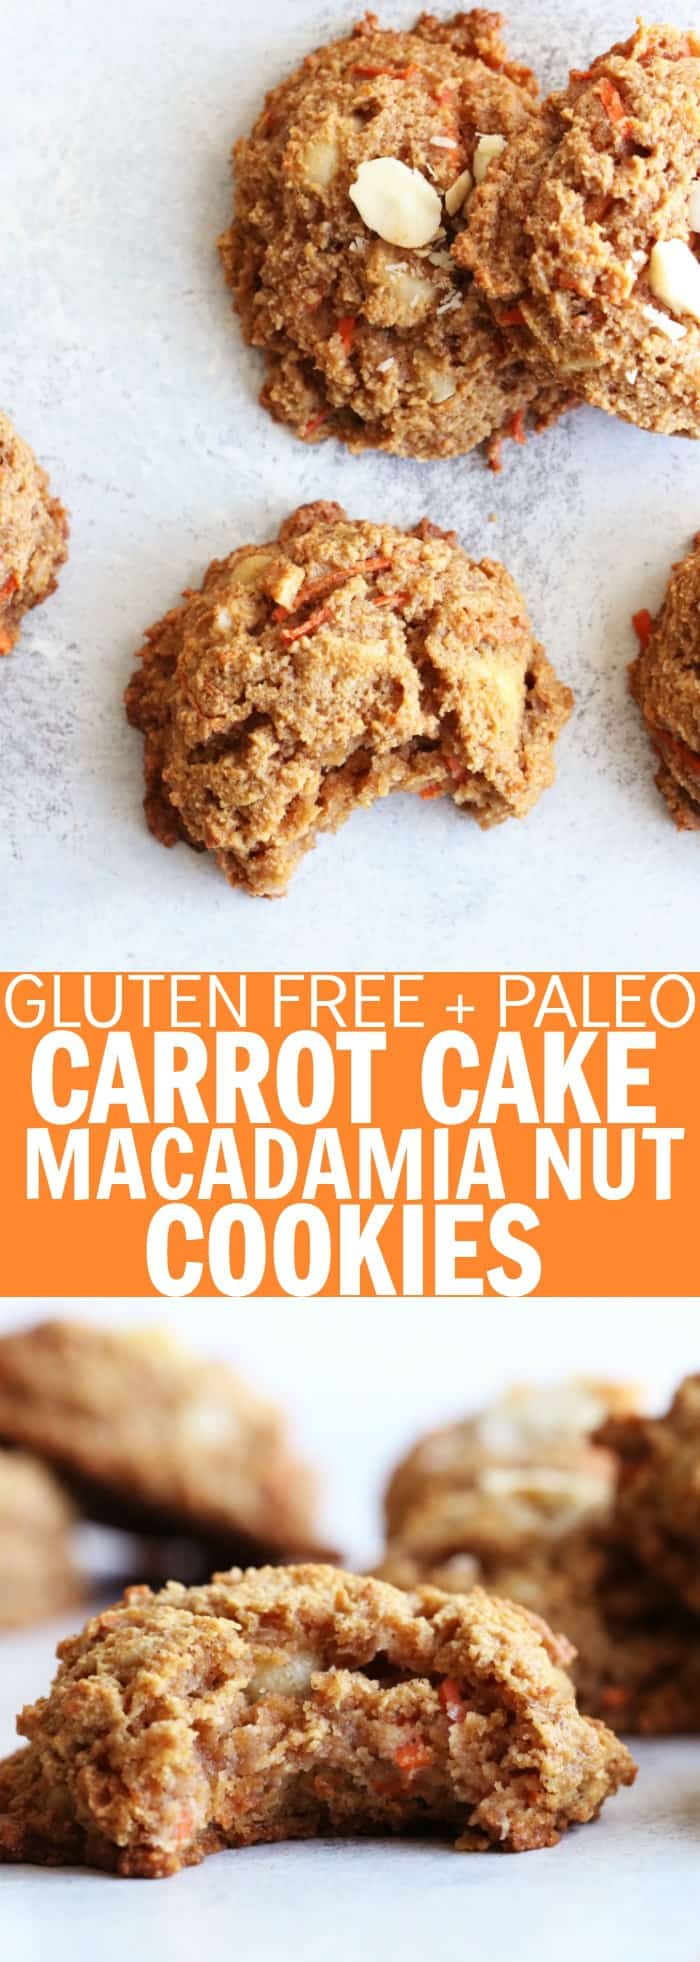 These Carrot Cake Macadamia Nut Cookies are so flavorful and delicious!! They are fluffy and moist and taste exactly like carrot cake but with a crisp outer edge! They're gluten free, paleo, and perfect for any time of day in my opinion!! thetoastedpinenut.com #thetoastedpinenut #glutenfree #paleo #dessert #cookie #carrot #cake #easter #dairyfree